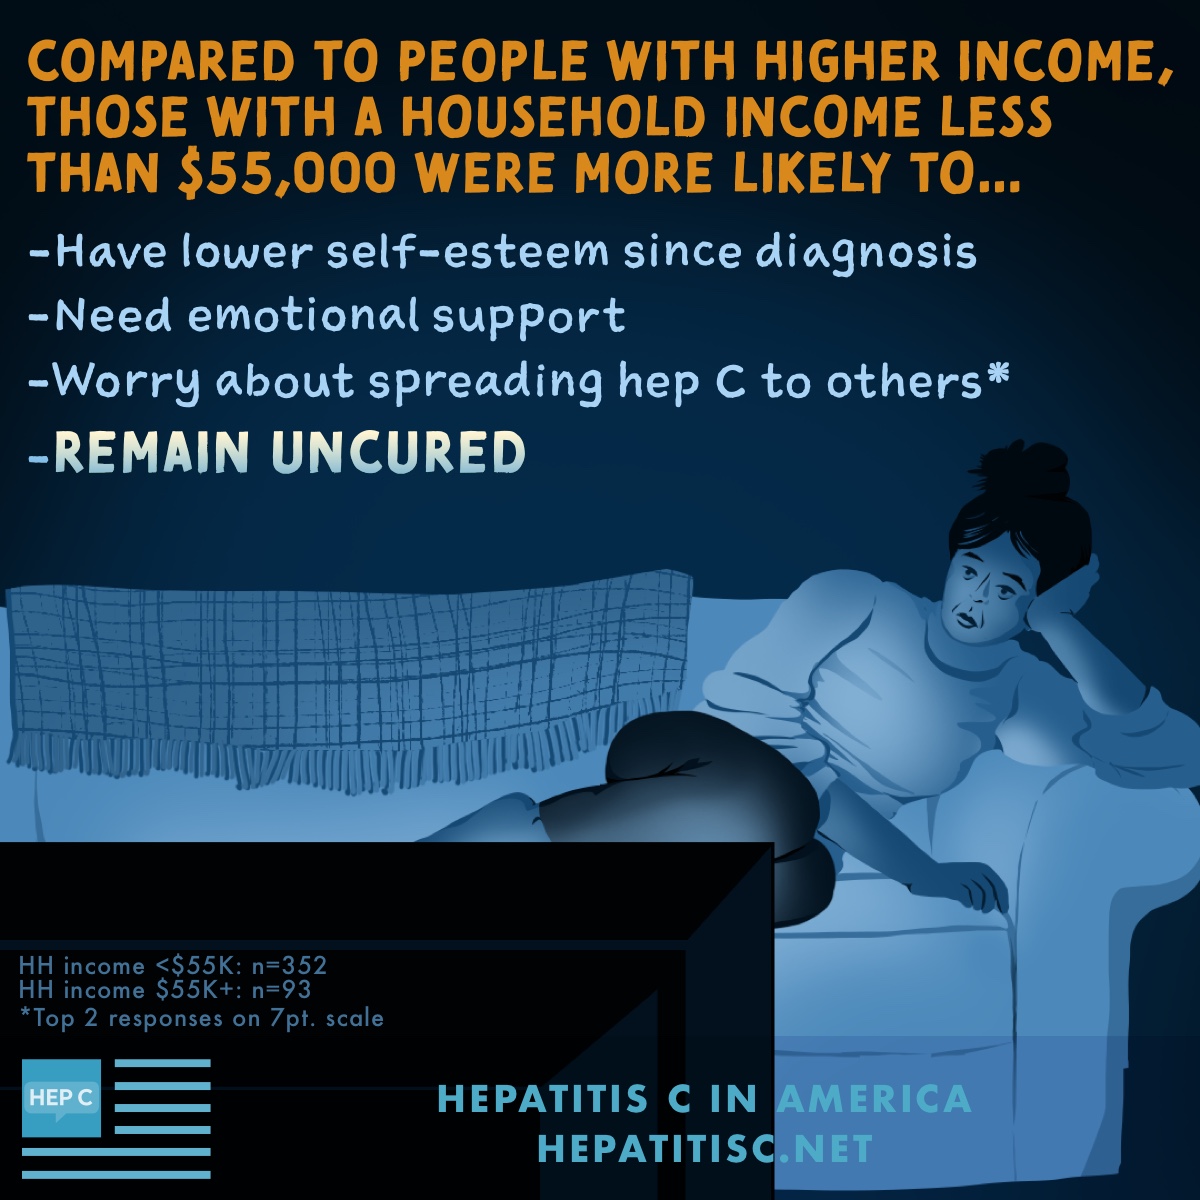 Compared to higher-income patients, those with a household income <$55,000 were more likely to have lower self-esteem since diagnosis, need emotional support, worry about spreading hep C, and remain uncured.